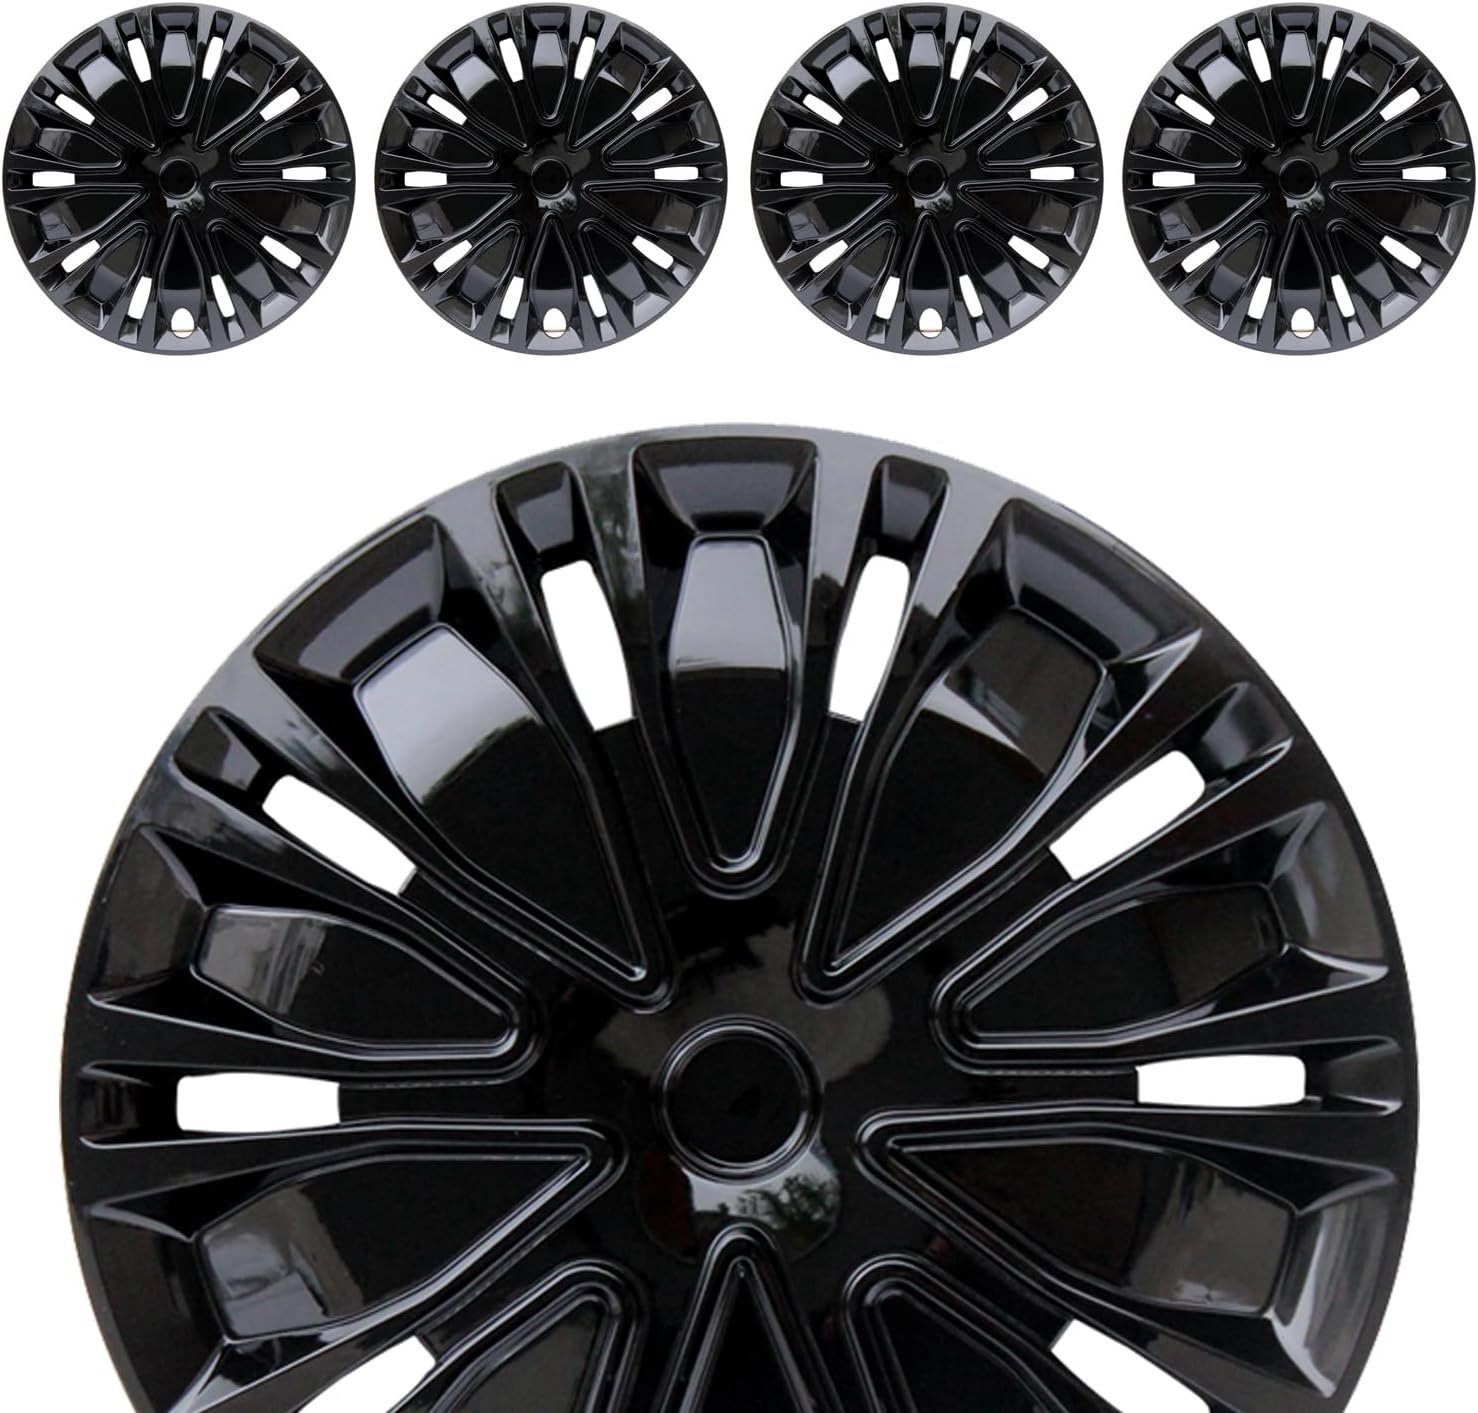 Hubcap Wheel Cover Review